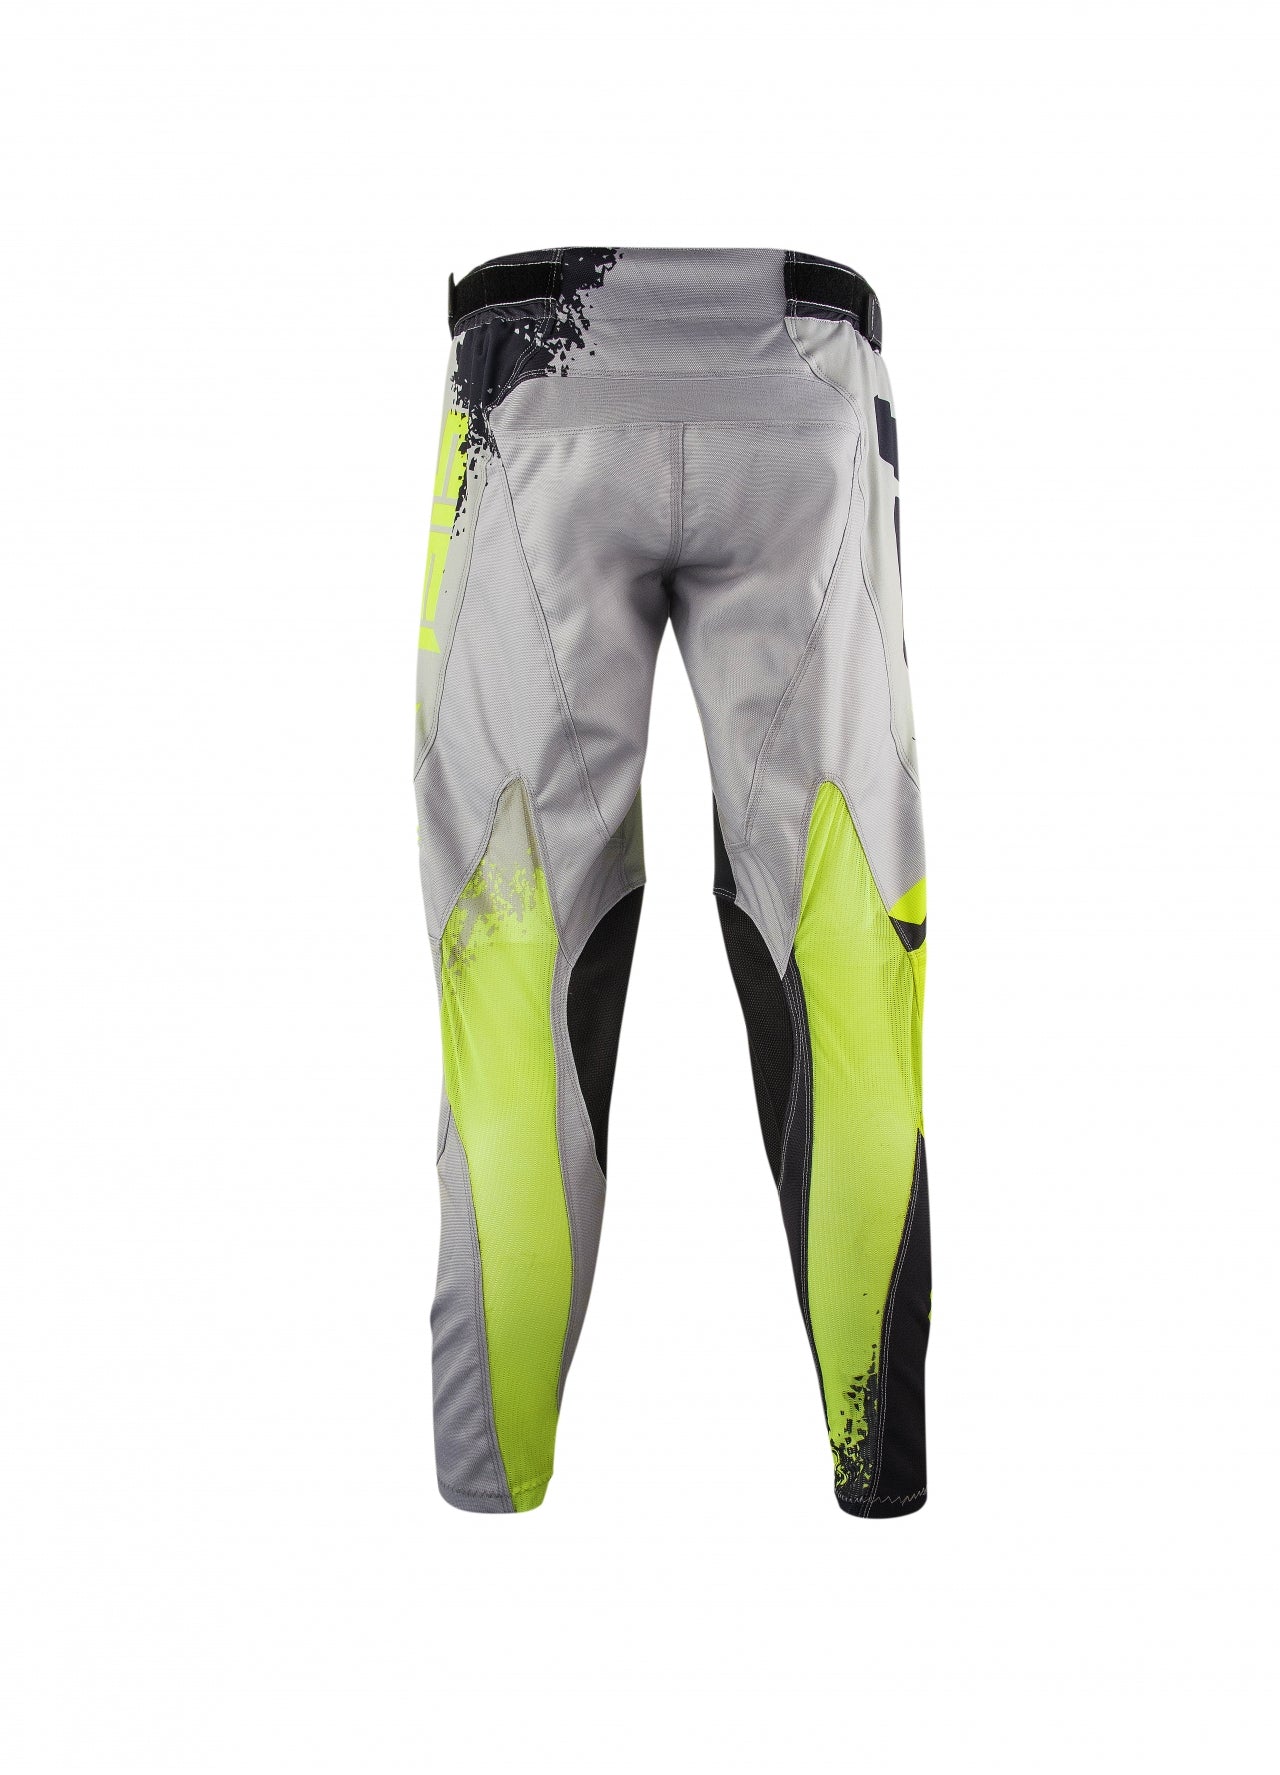 **AEROTUNED SPECIAL EDITION PANT